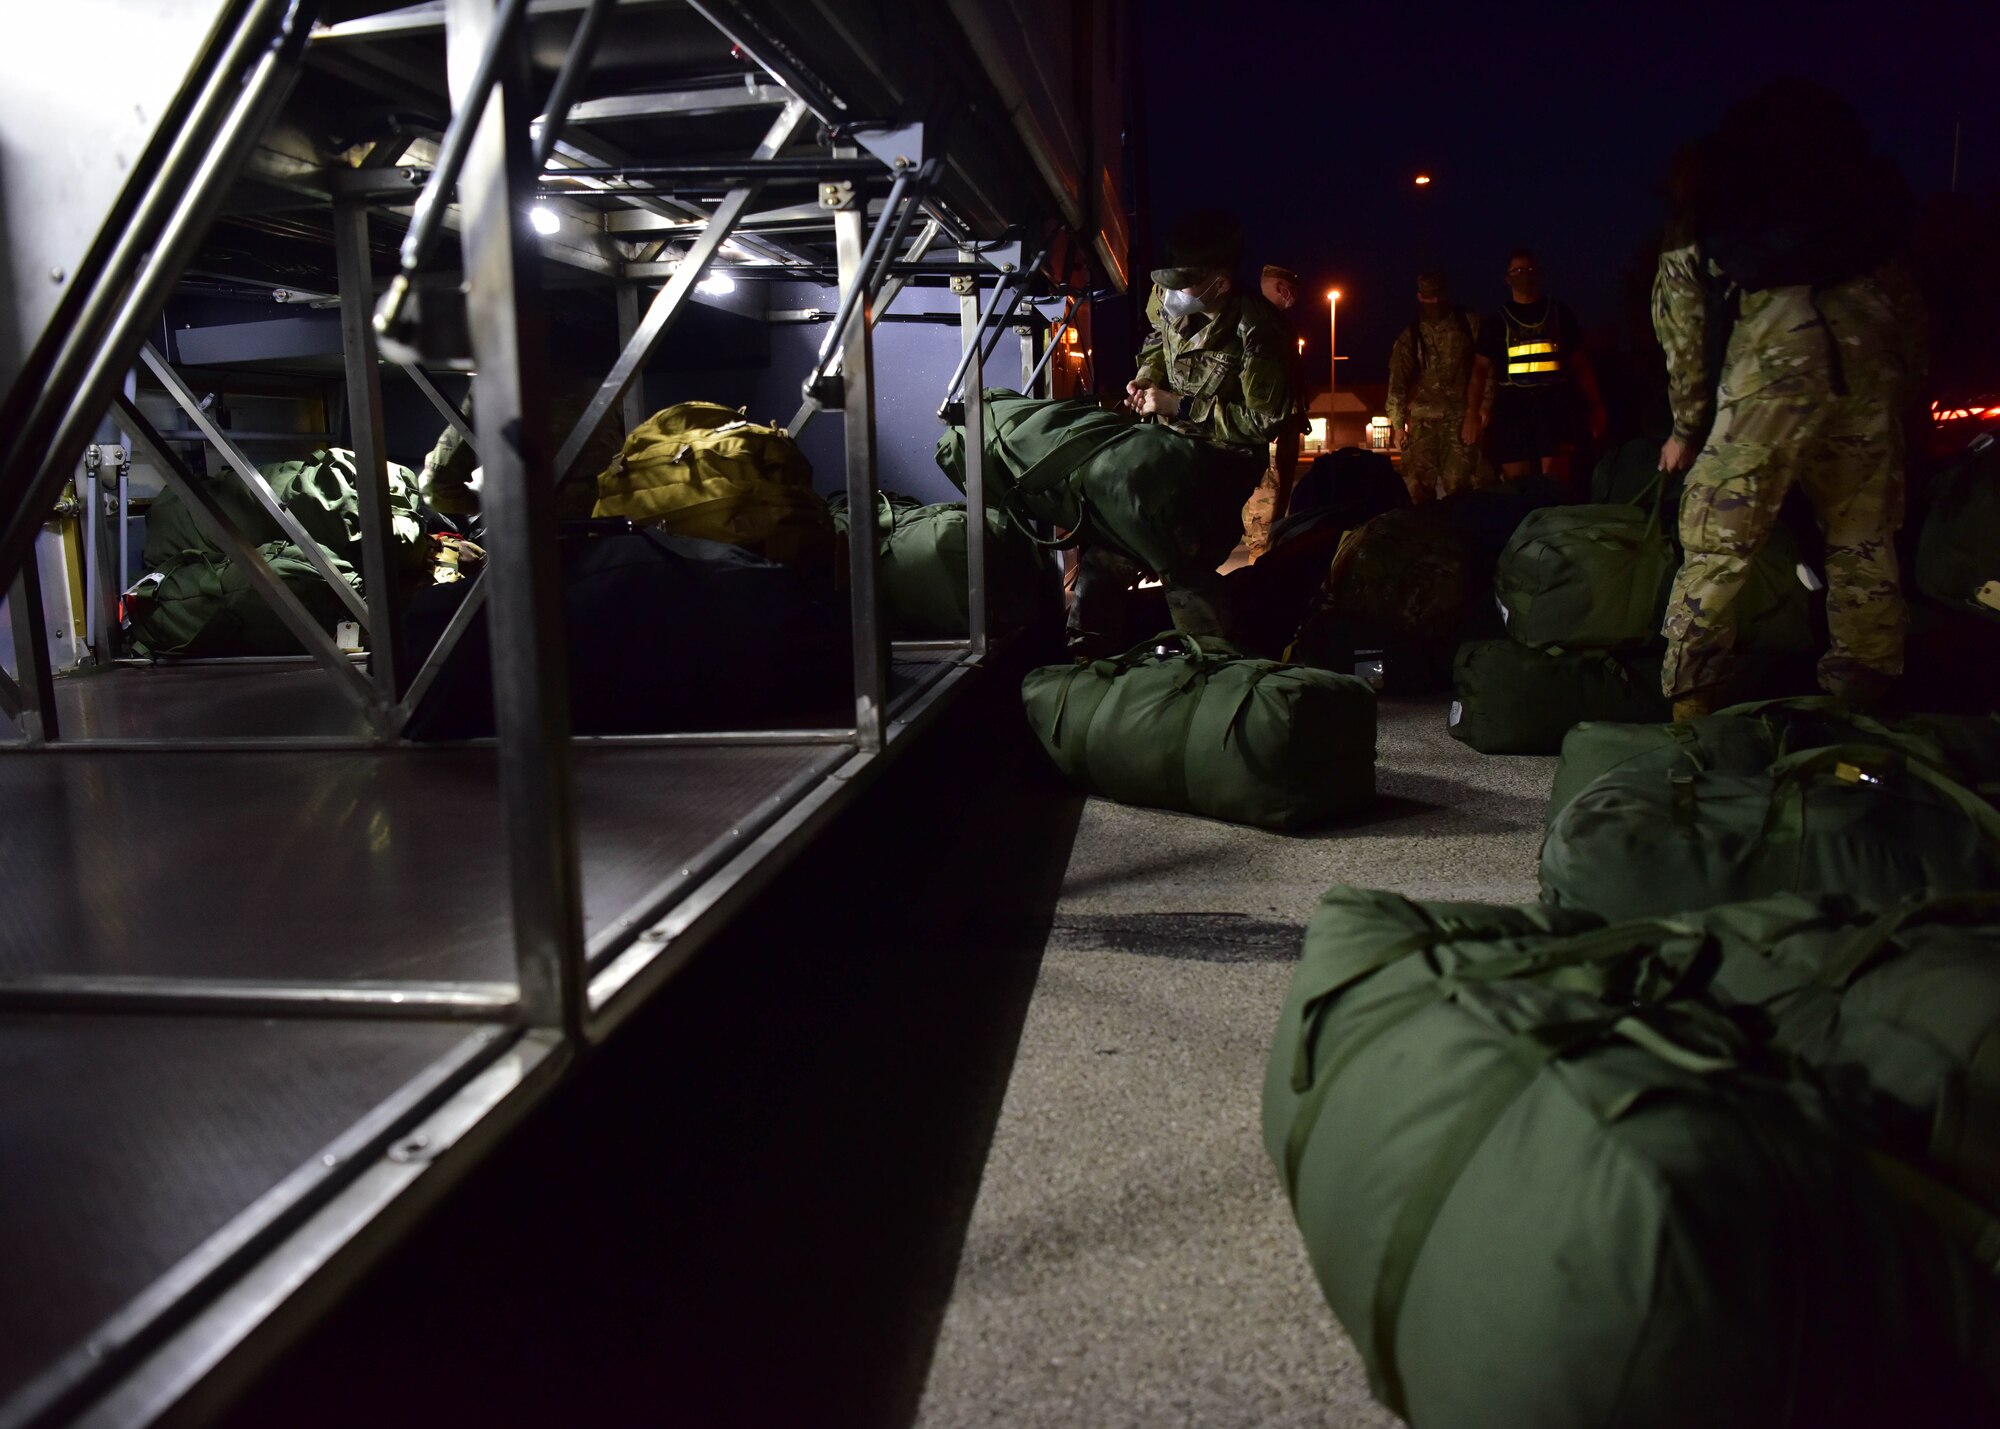 Soldiers with the 344th Military Intelligence Battalion load their bags onto a bus on Goodfellow Air Force Base, Texas, May 5, 2020. The Soldiers were the first class of U.S. Army intelligence graduates to move to their operational units during the COVID-19 restrictions. (U.S. Air Force photo by Staff Sgt. Chad Warren)